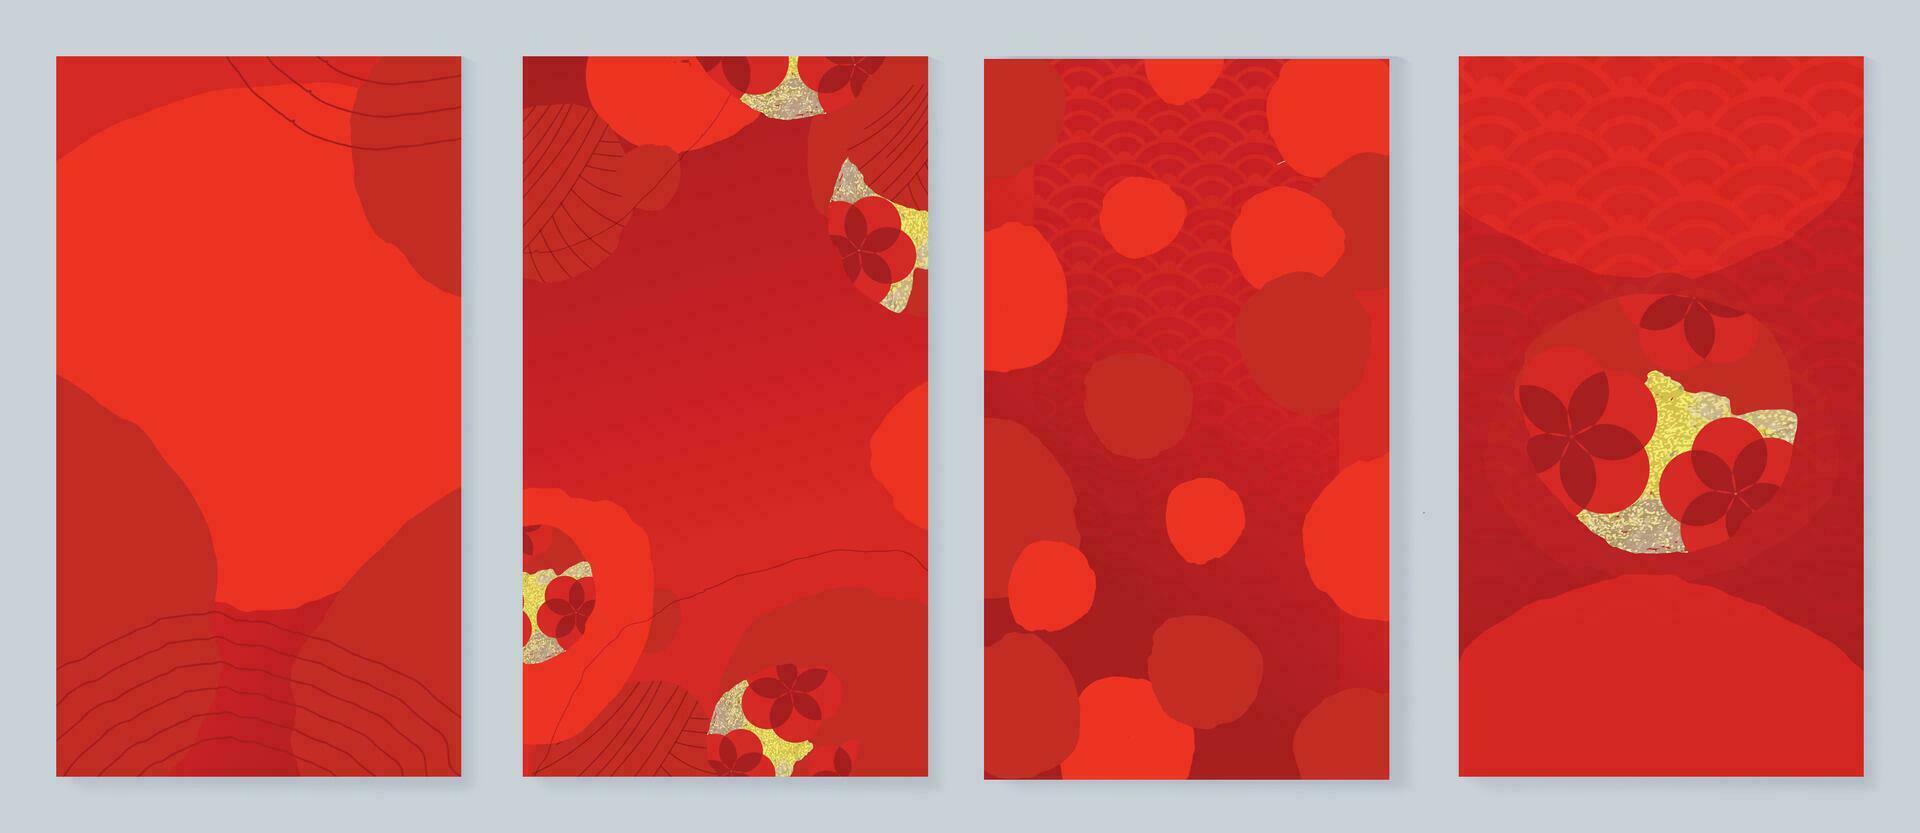 Chinese New Year 2024 card background vector. Year of the dragon design with flower, gold texture, chinese pattern. Elegant oriental illustration for cover, banner, website, calendar, envelope. vector